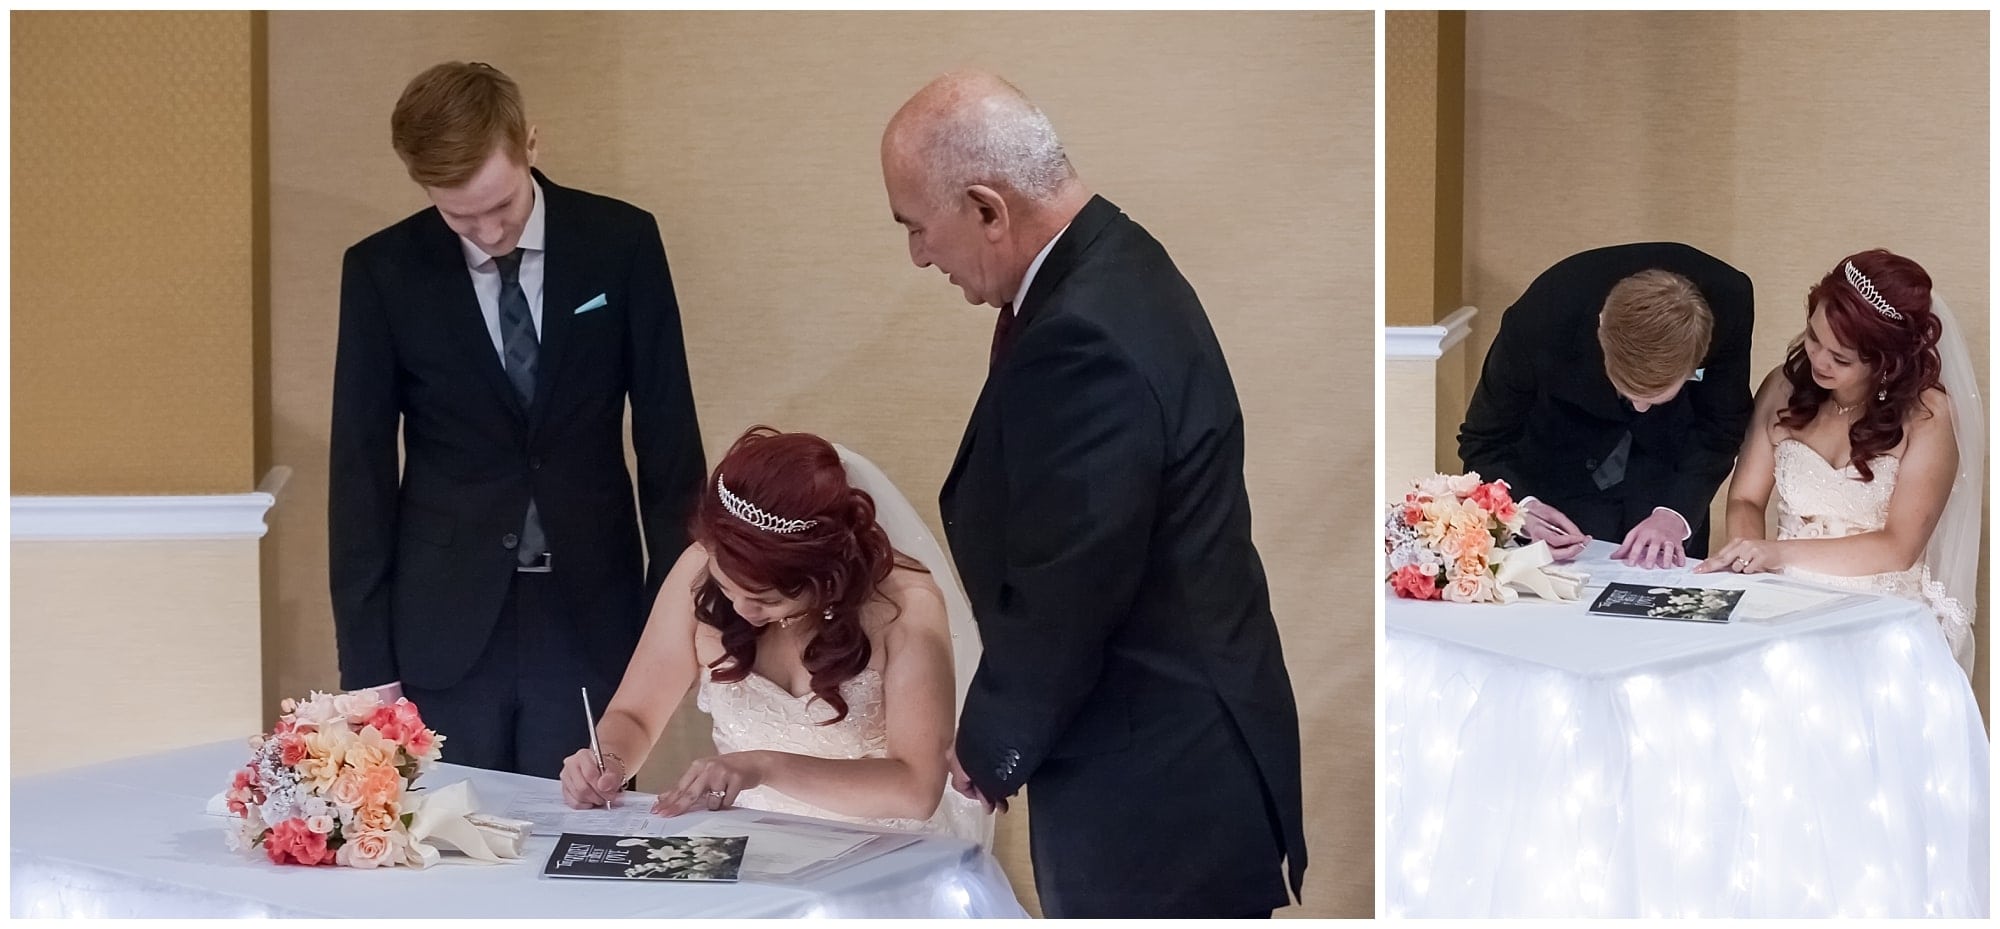 The bride and groom sign their marriage certificate during their wedding at the Atlantica Hotel in Halifax.